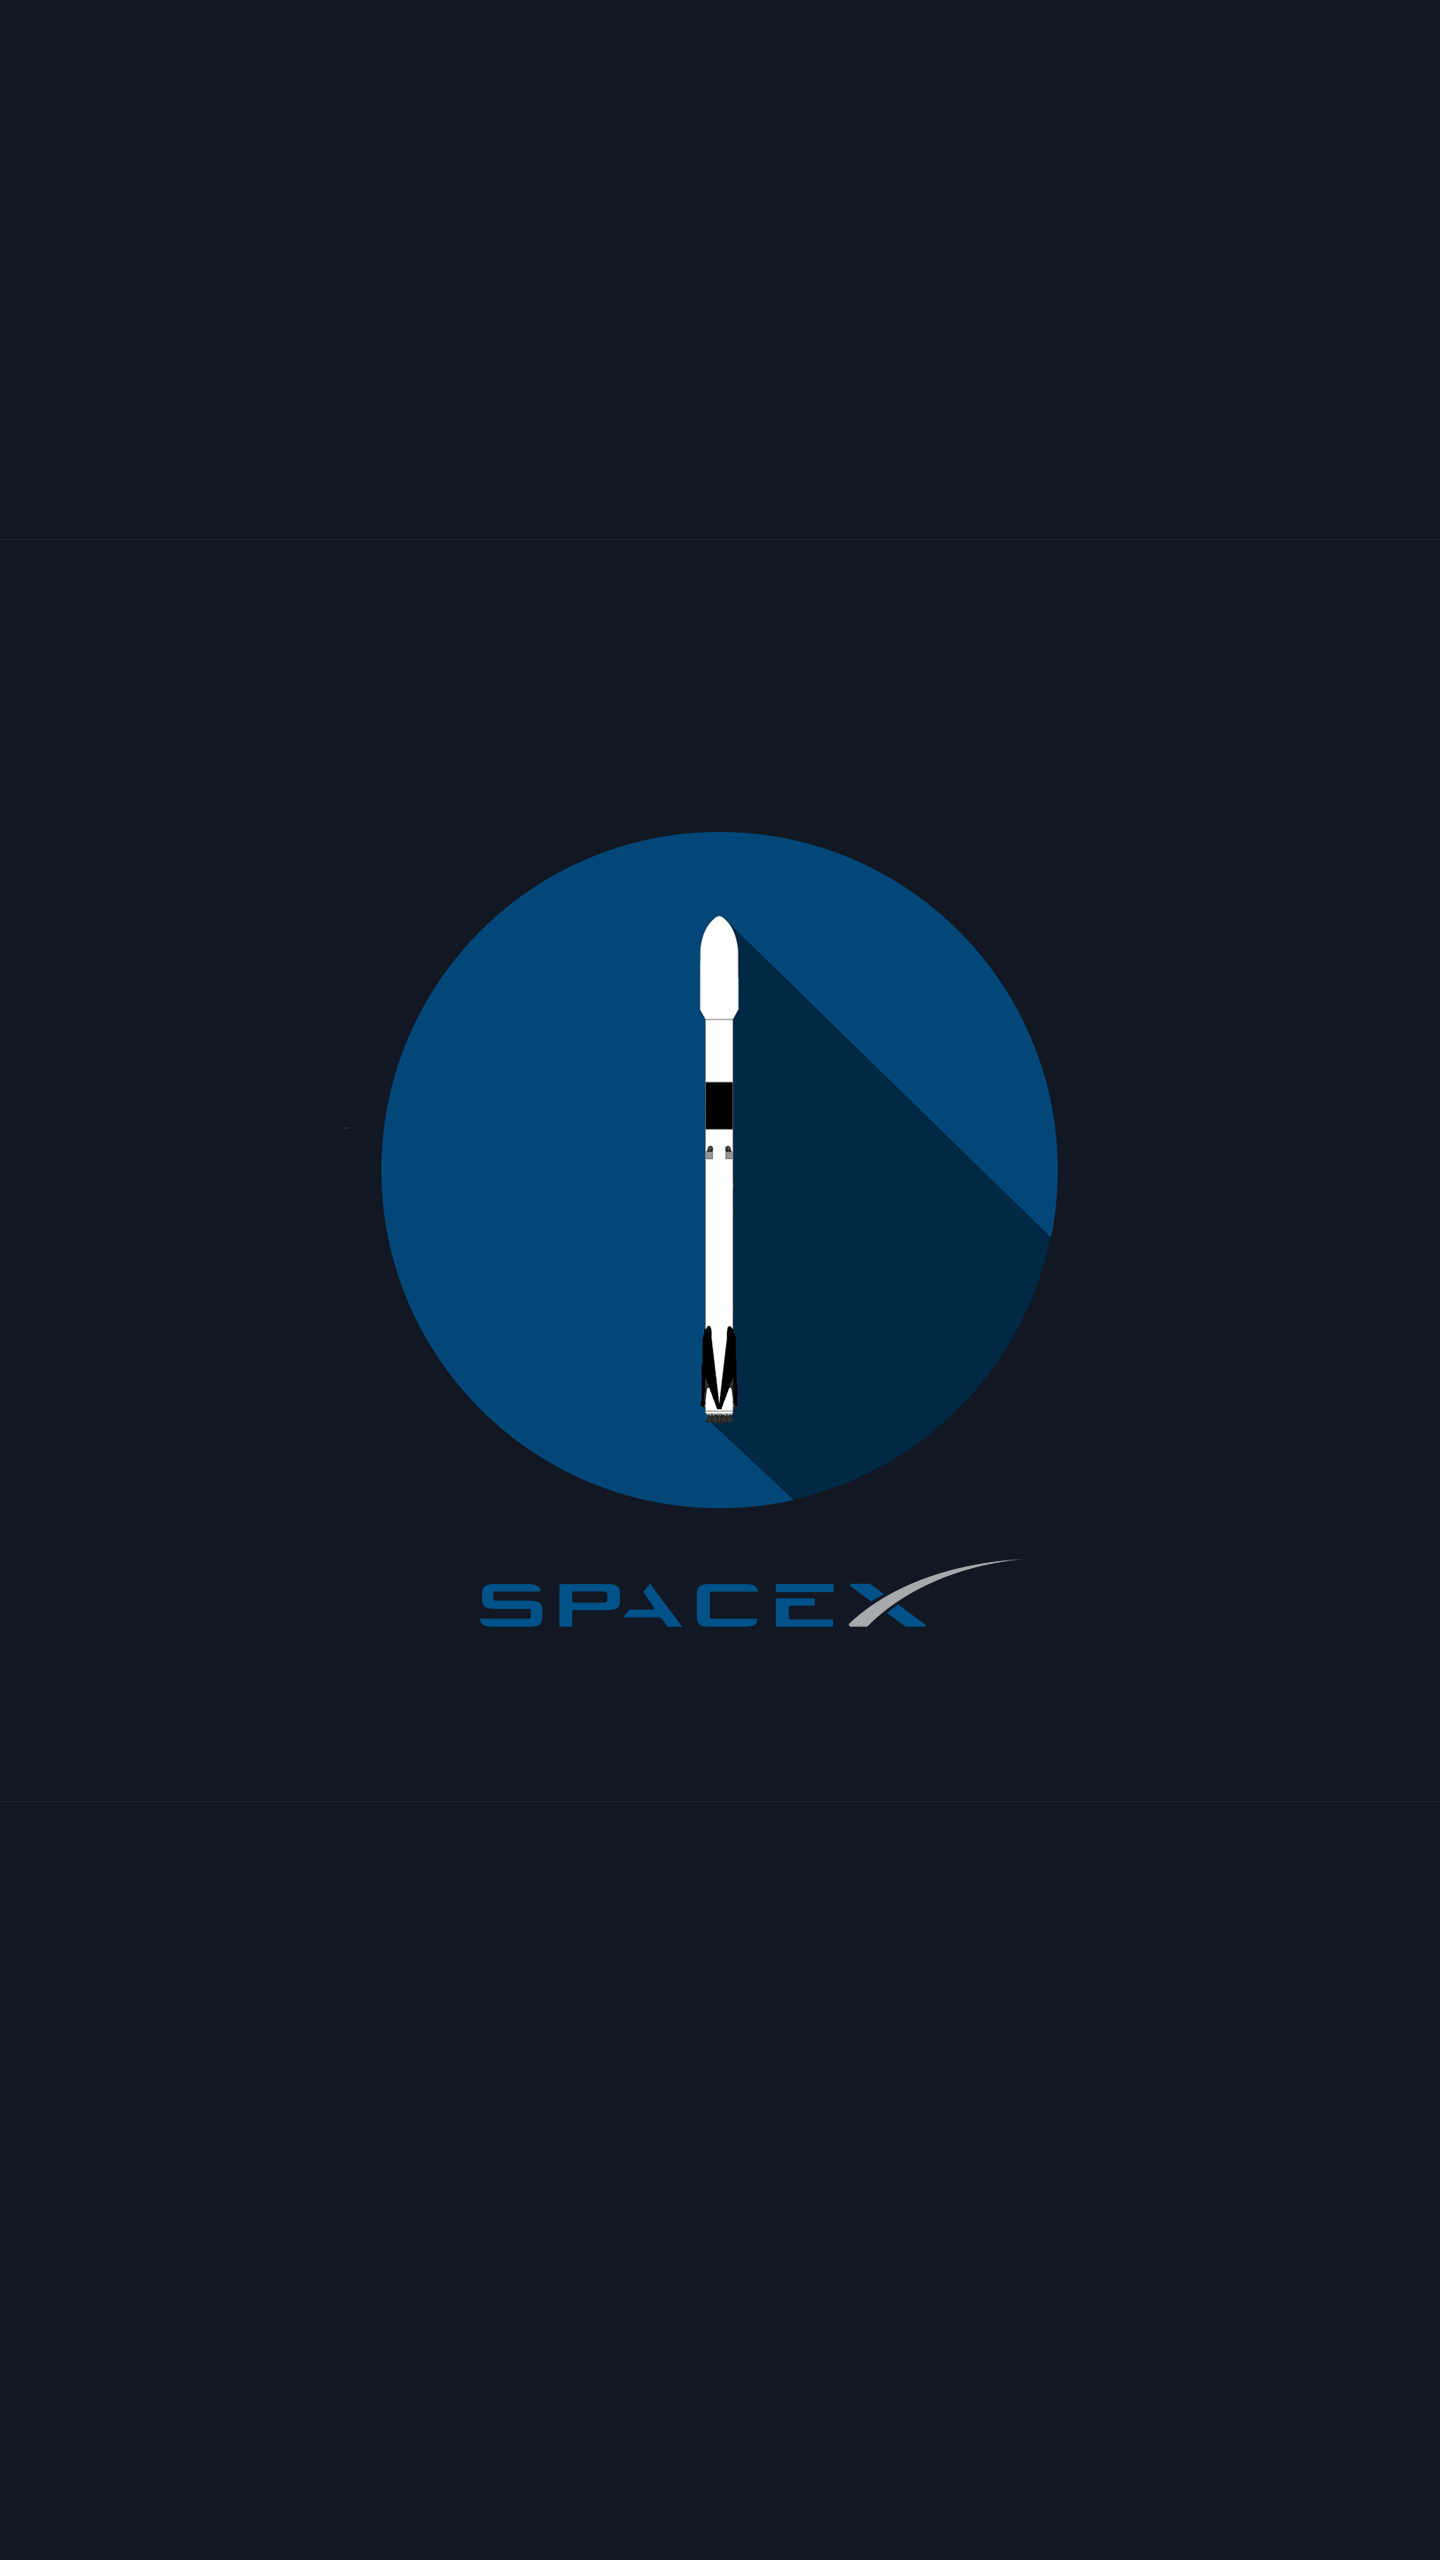 Spacex Inspiration4 Wallpapers